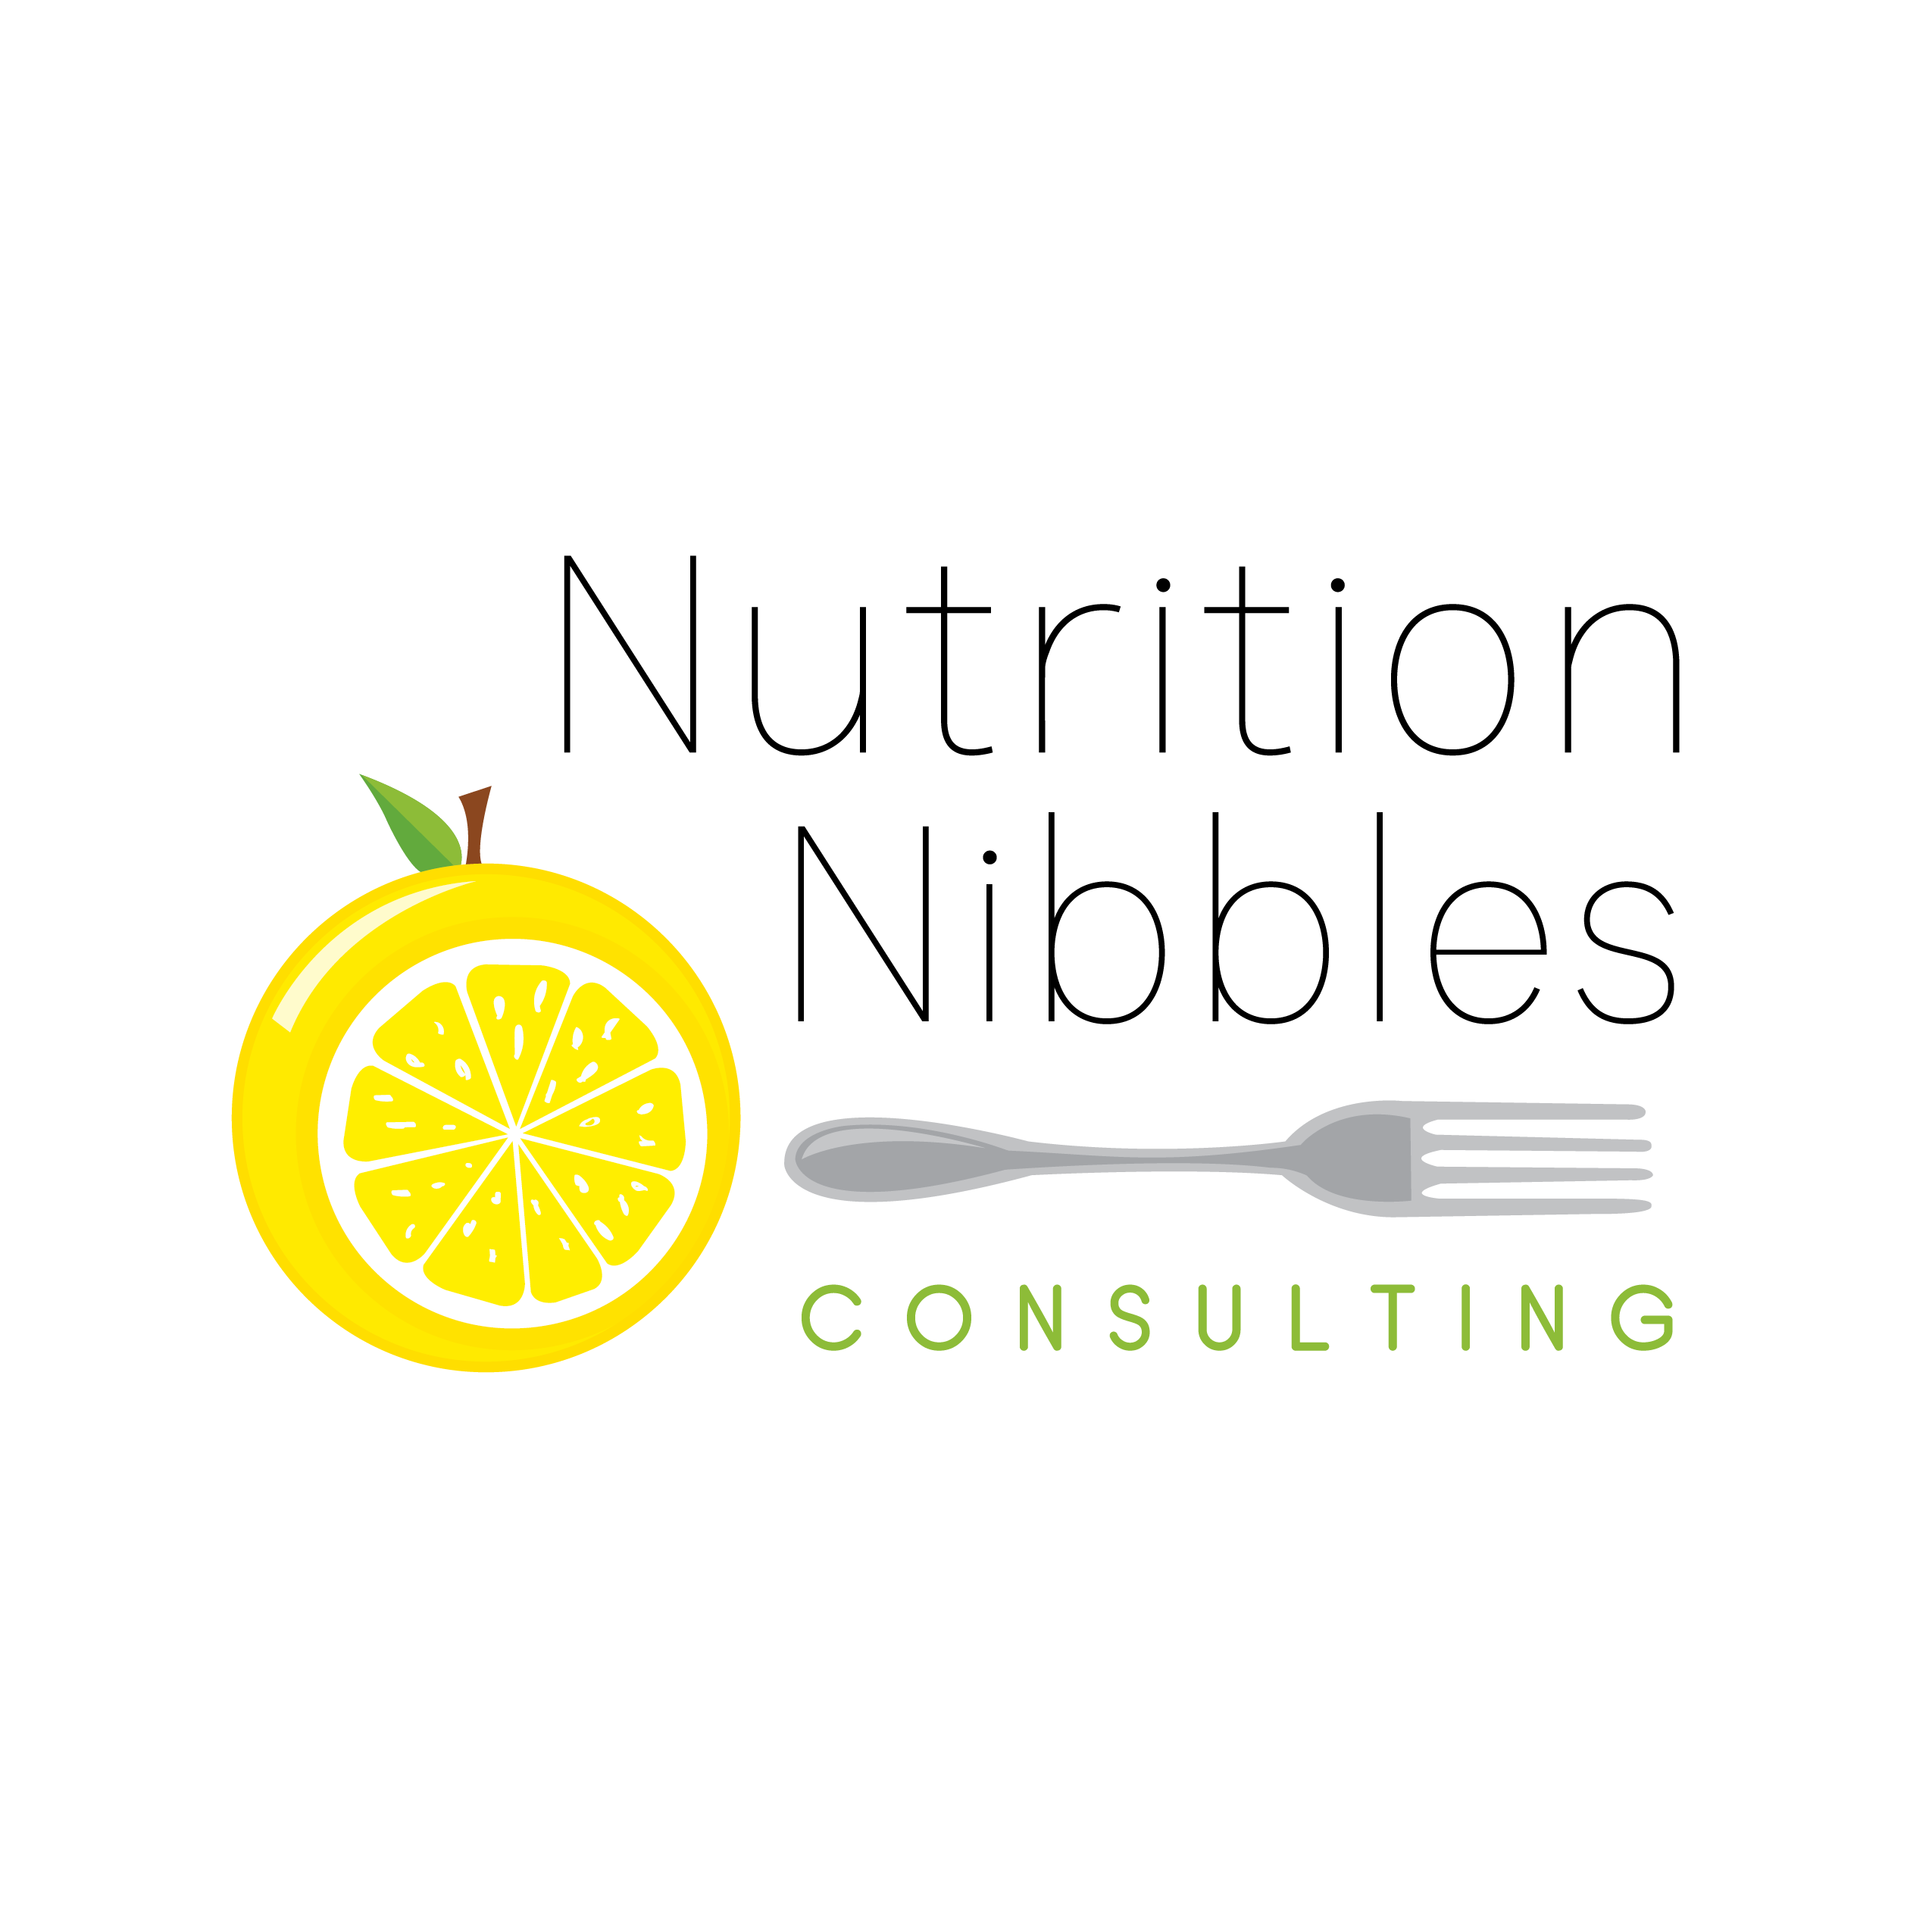 Nutrition Nibbles Consulting LLC